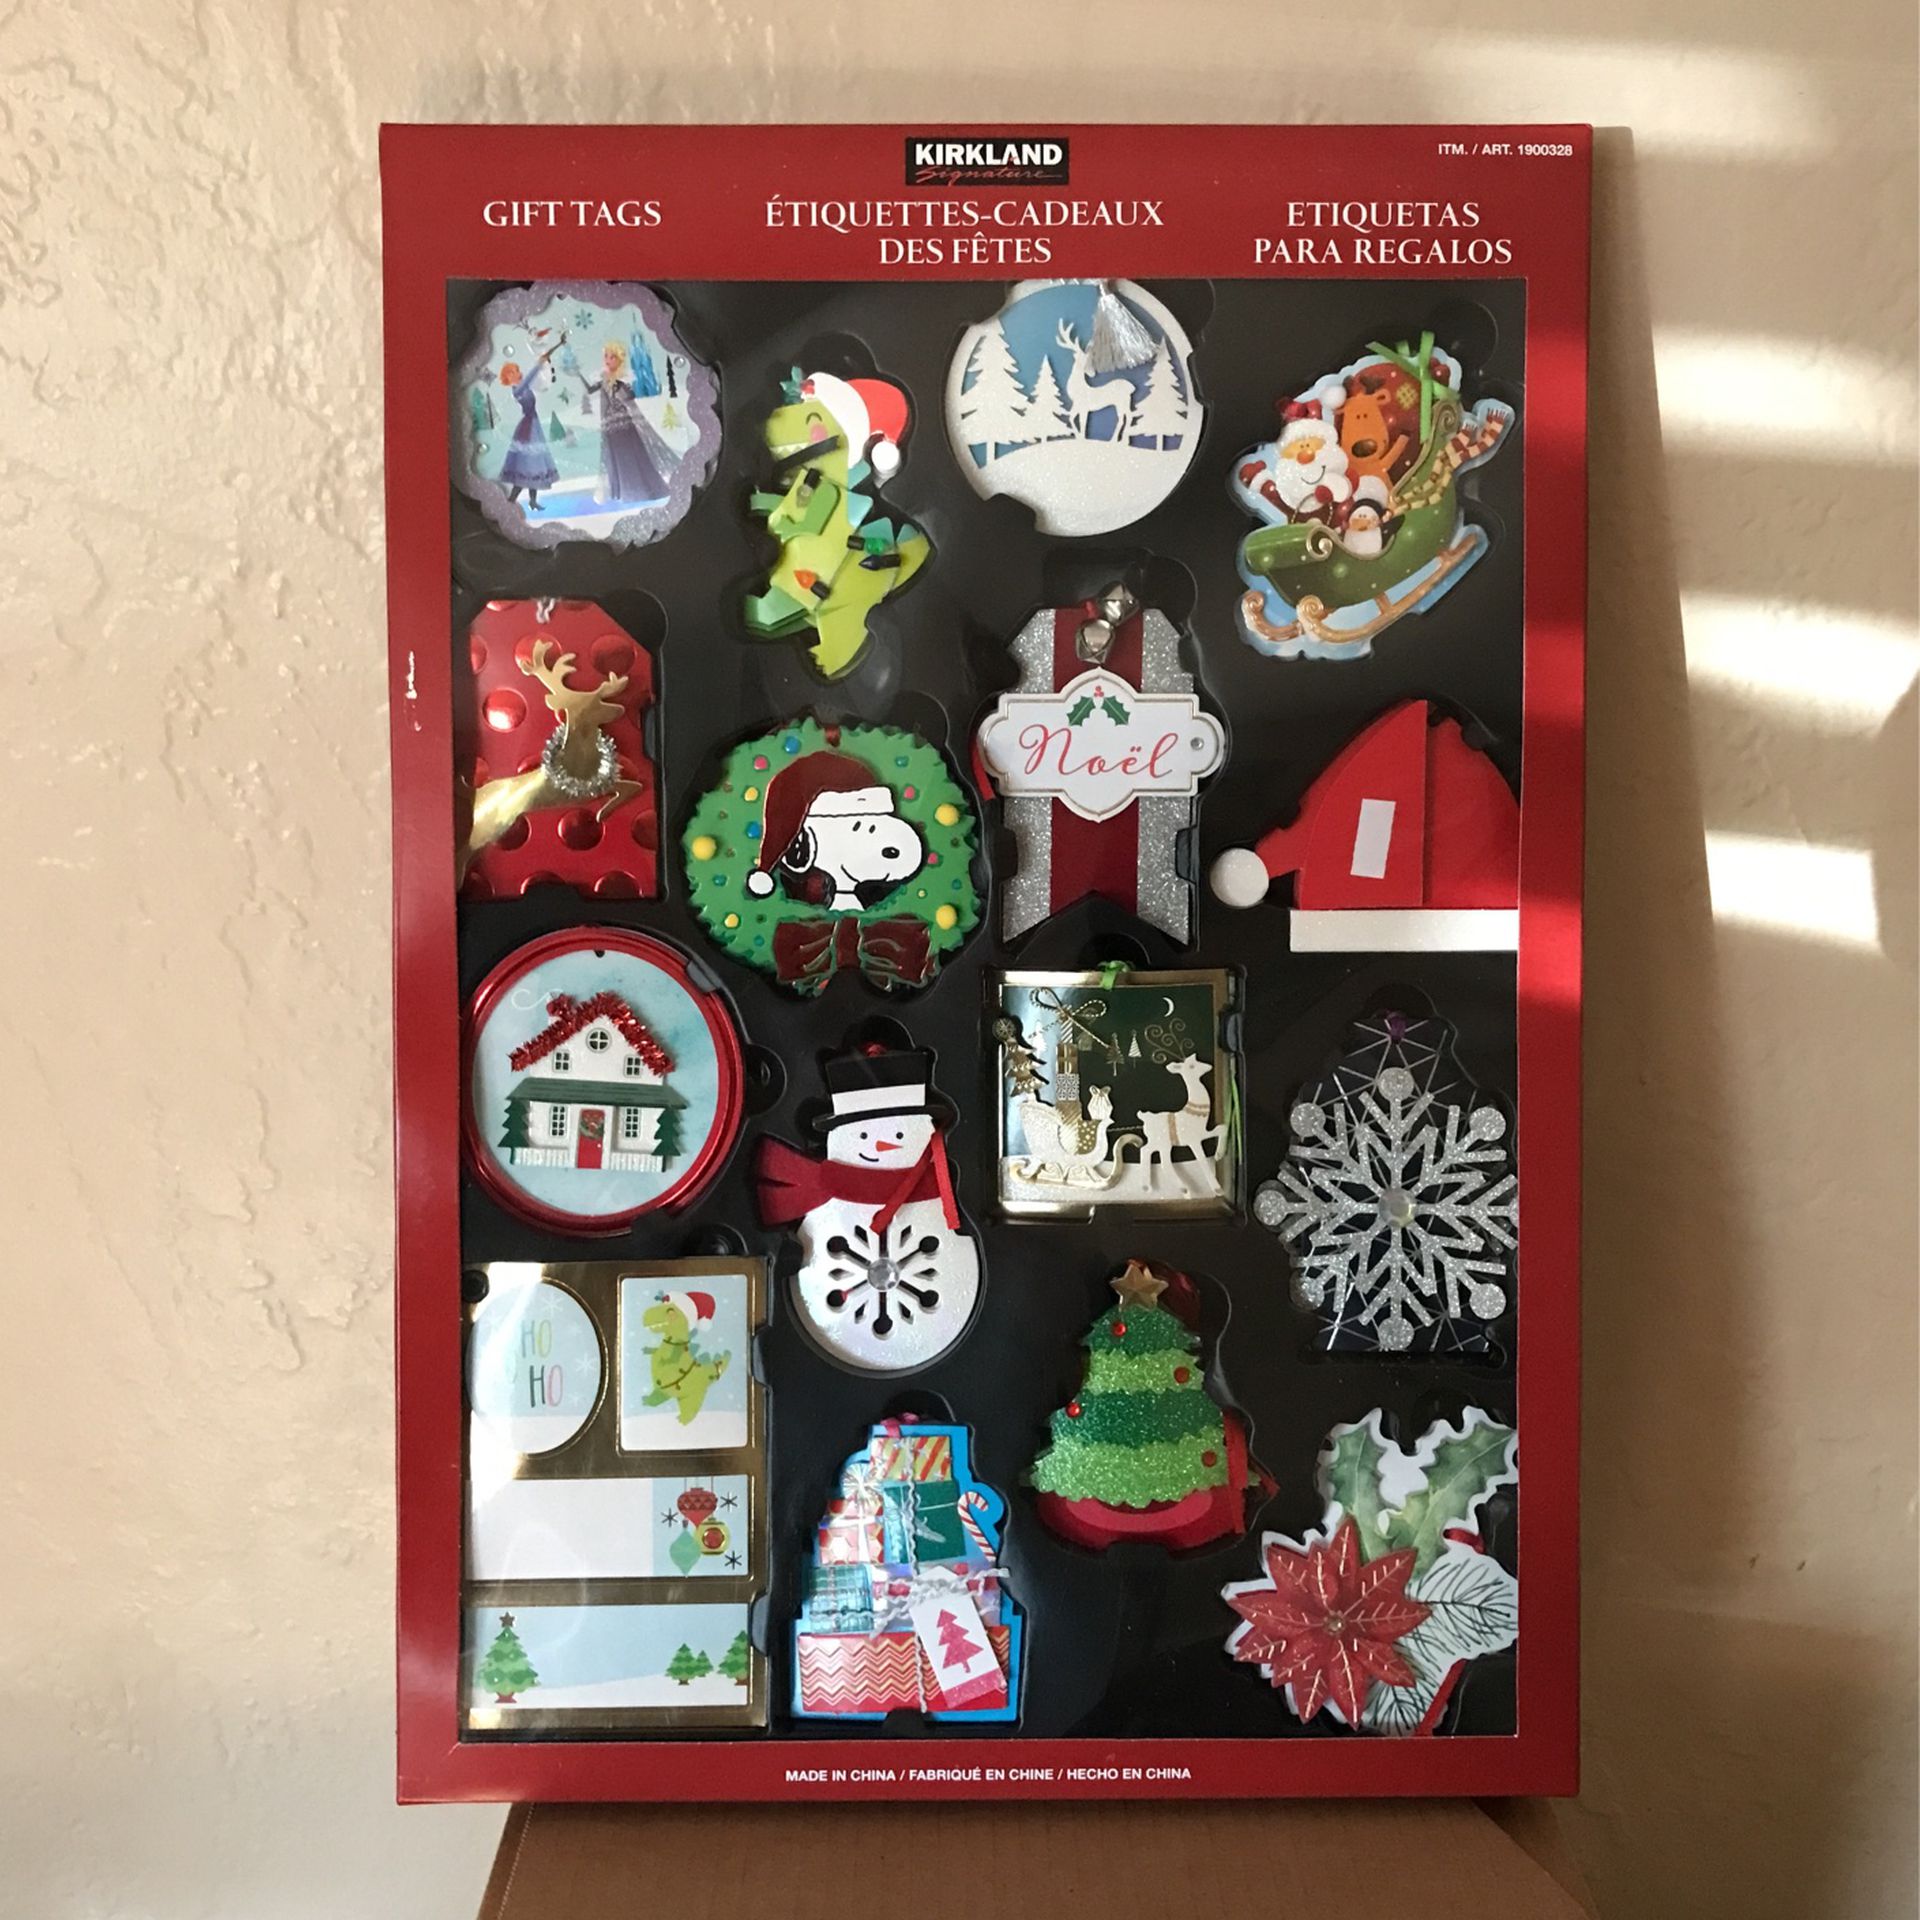 Gift Tags New In Box From Costco 8.00